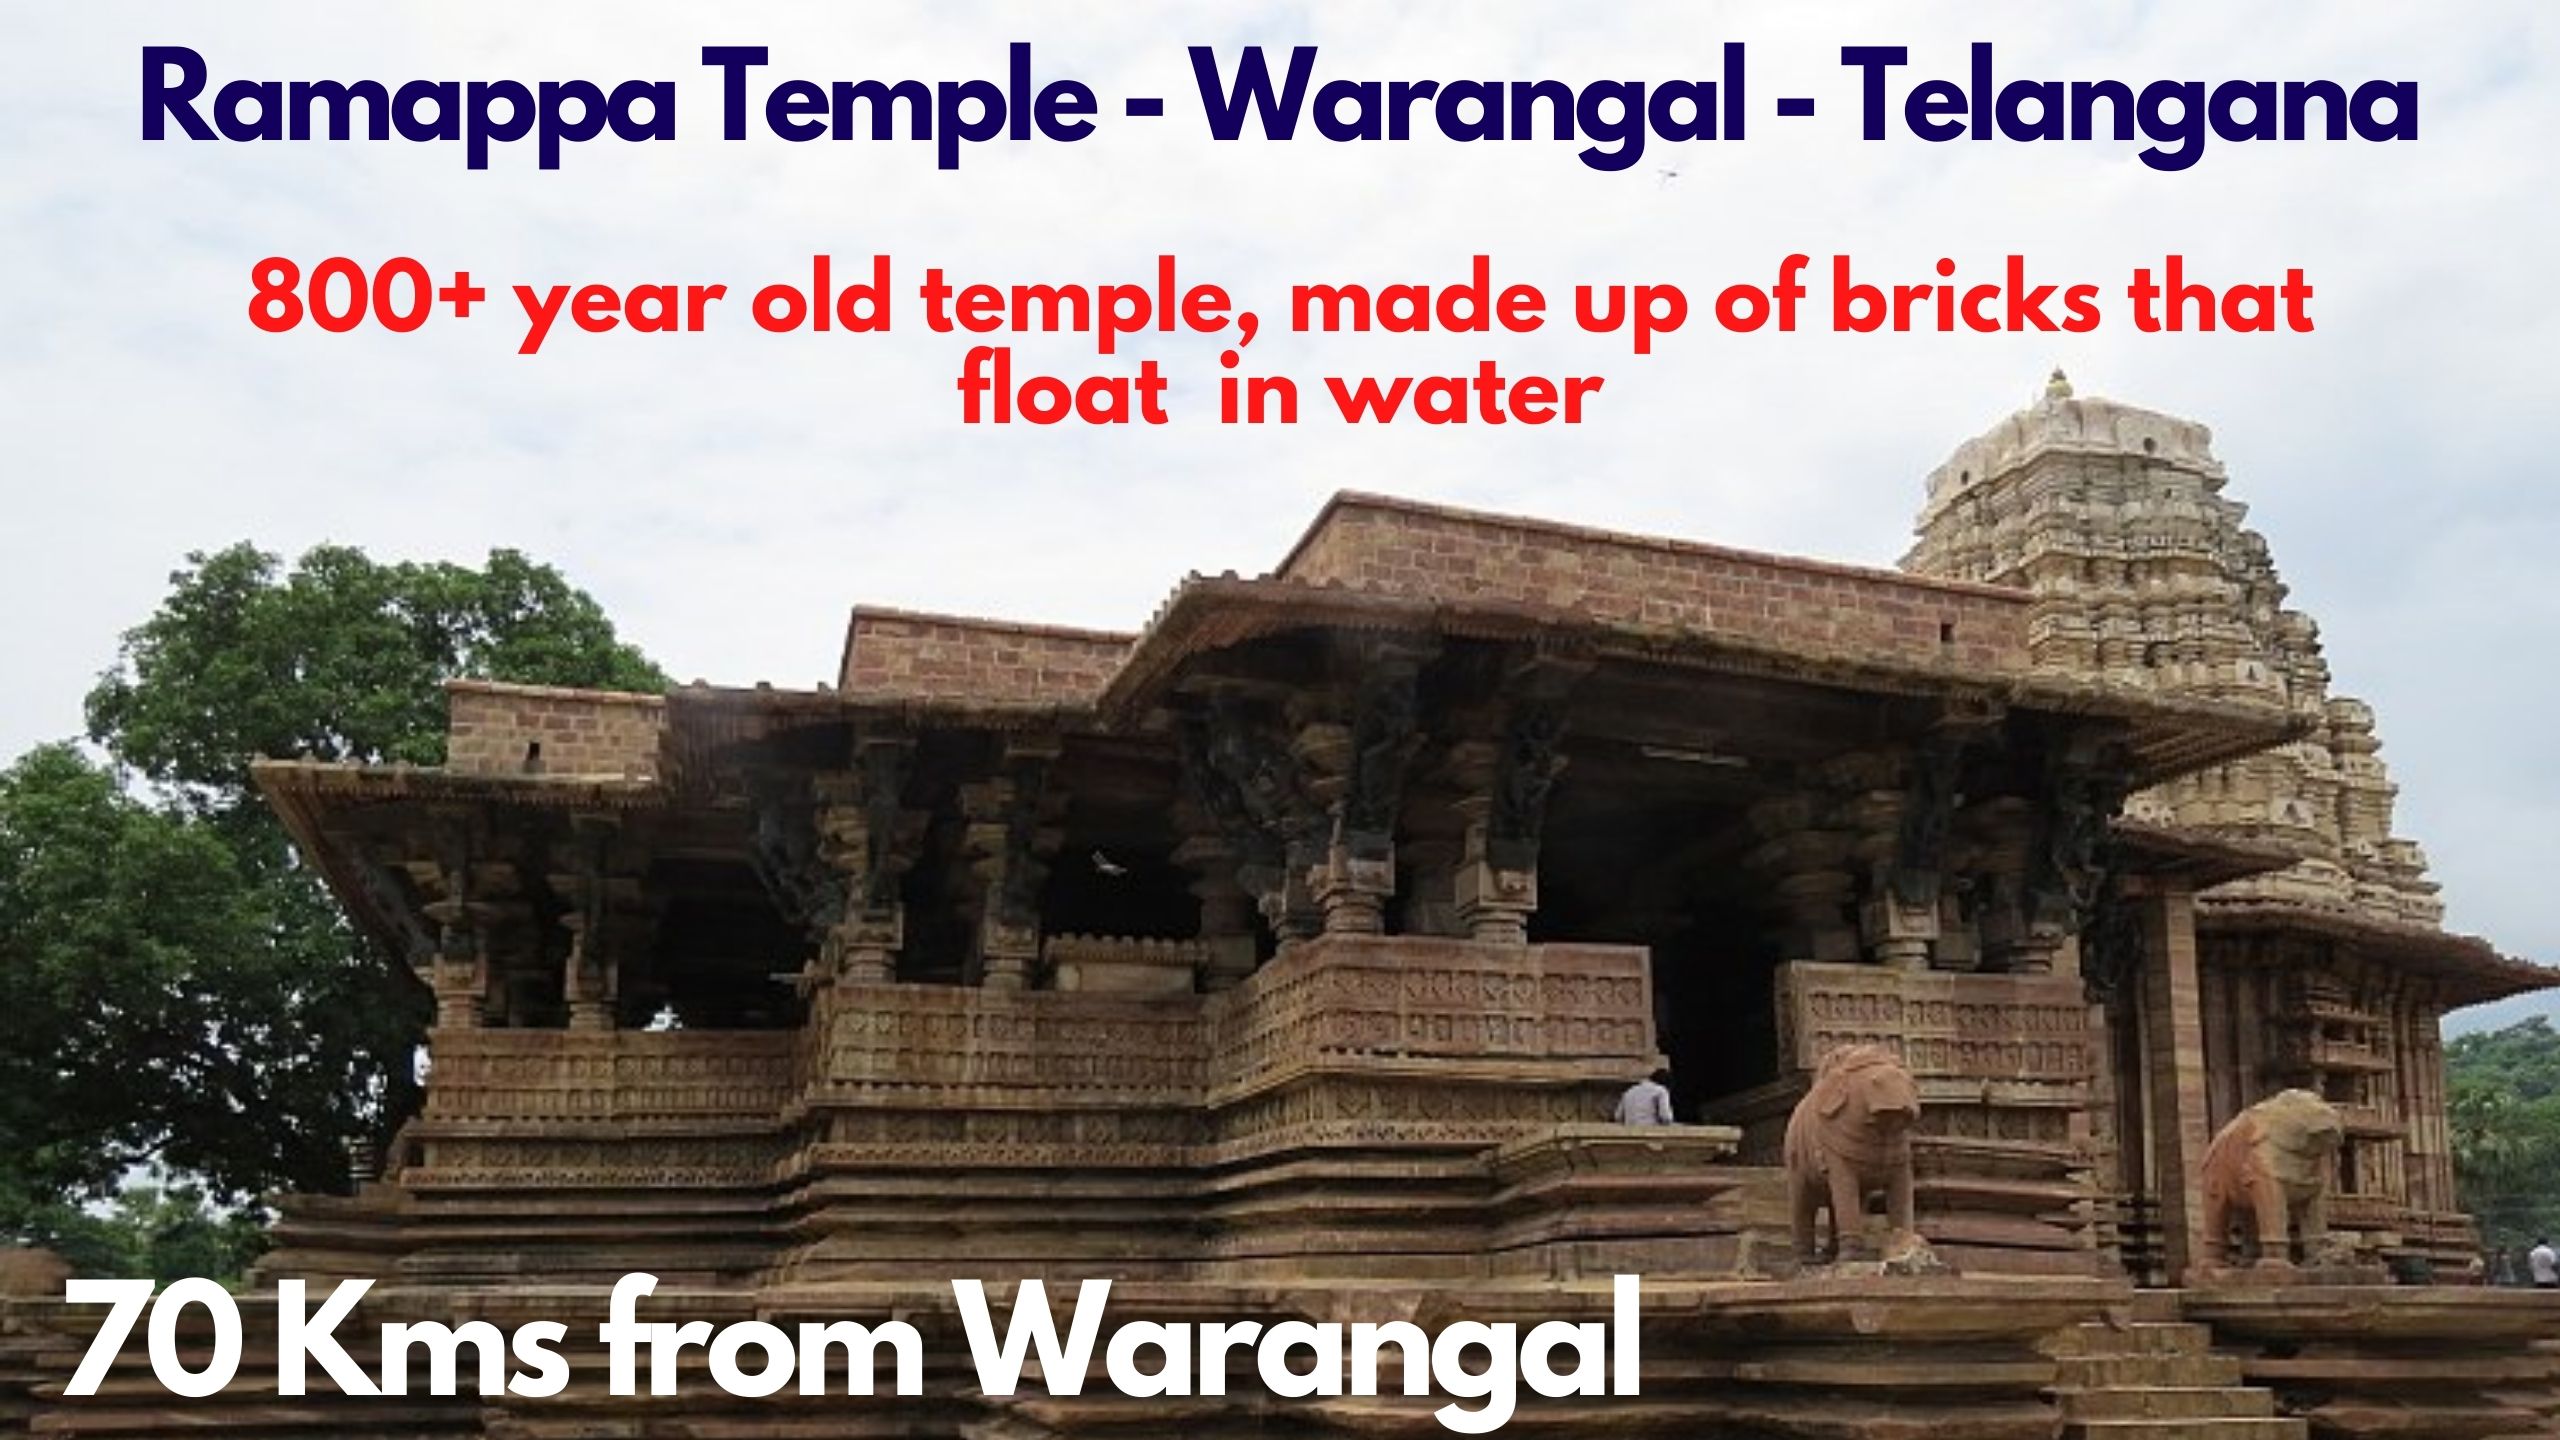 Ramappa Temple – 800 year old temple, made up of bricks that float on water and other amazing facts!